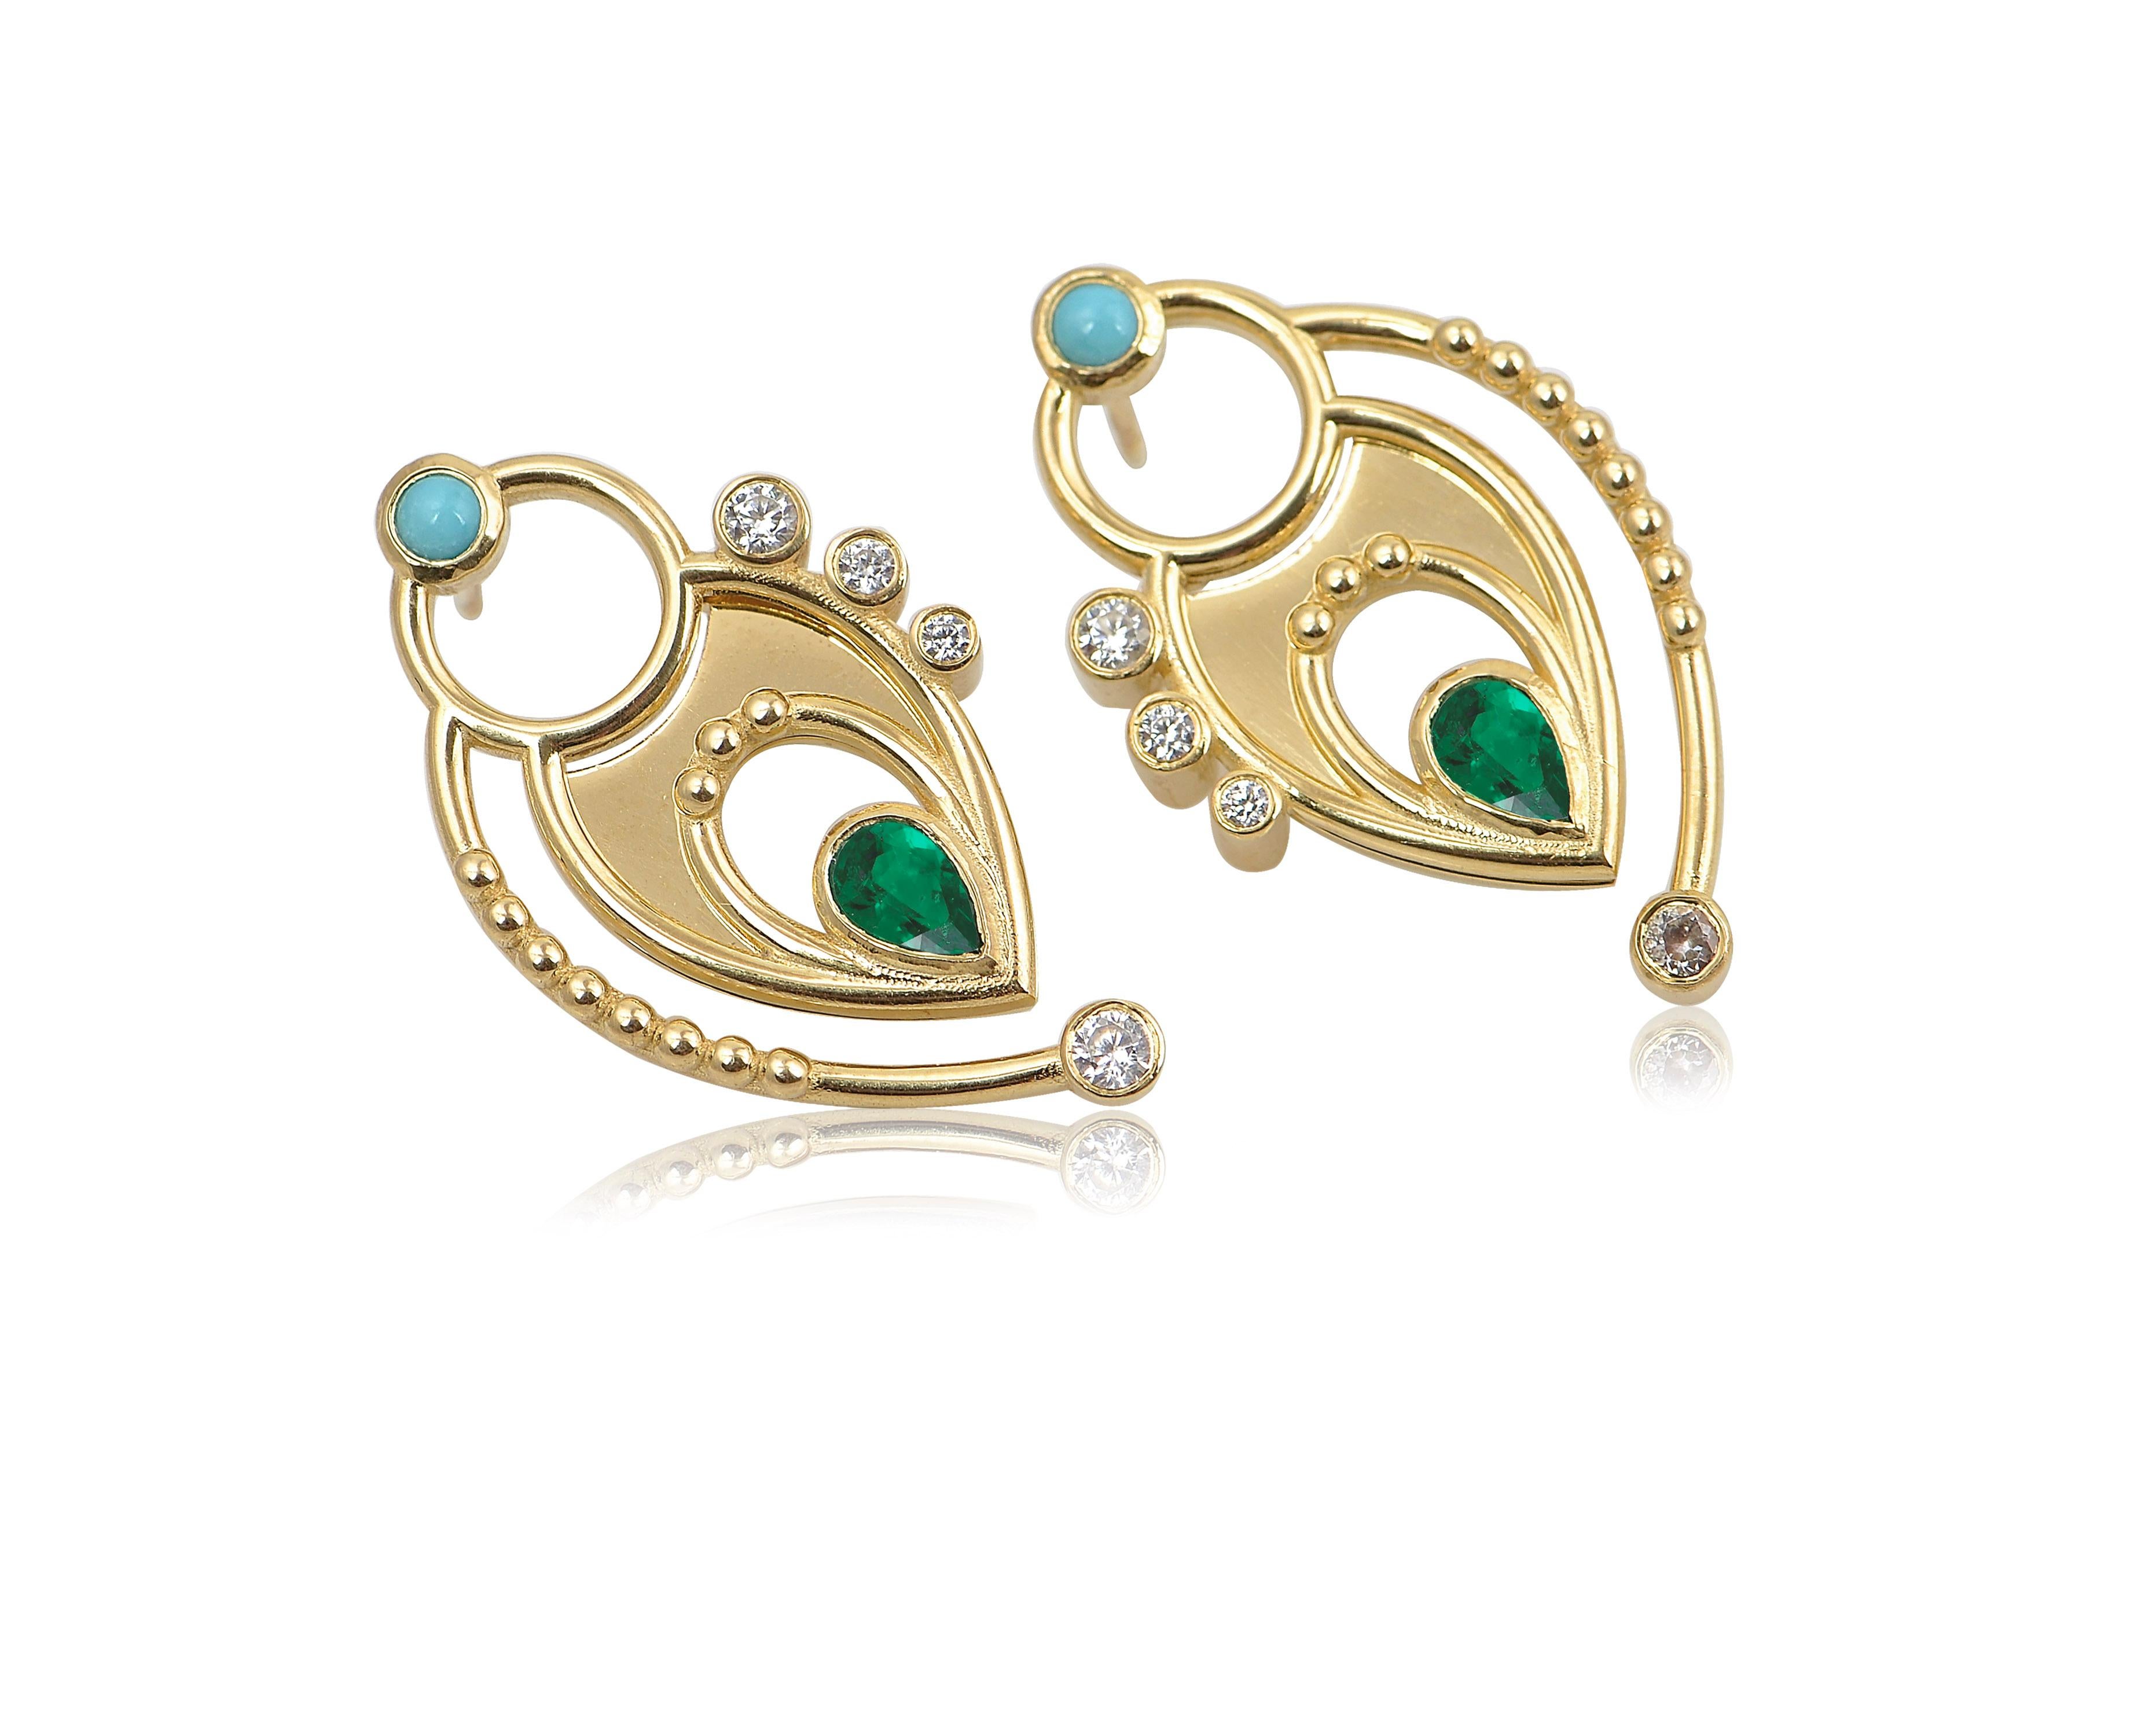 Contemporary Gold Textures Earrings in 18 Karat Yellow Gold with Diamond, Turquoise, Emerald For Sale